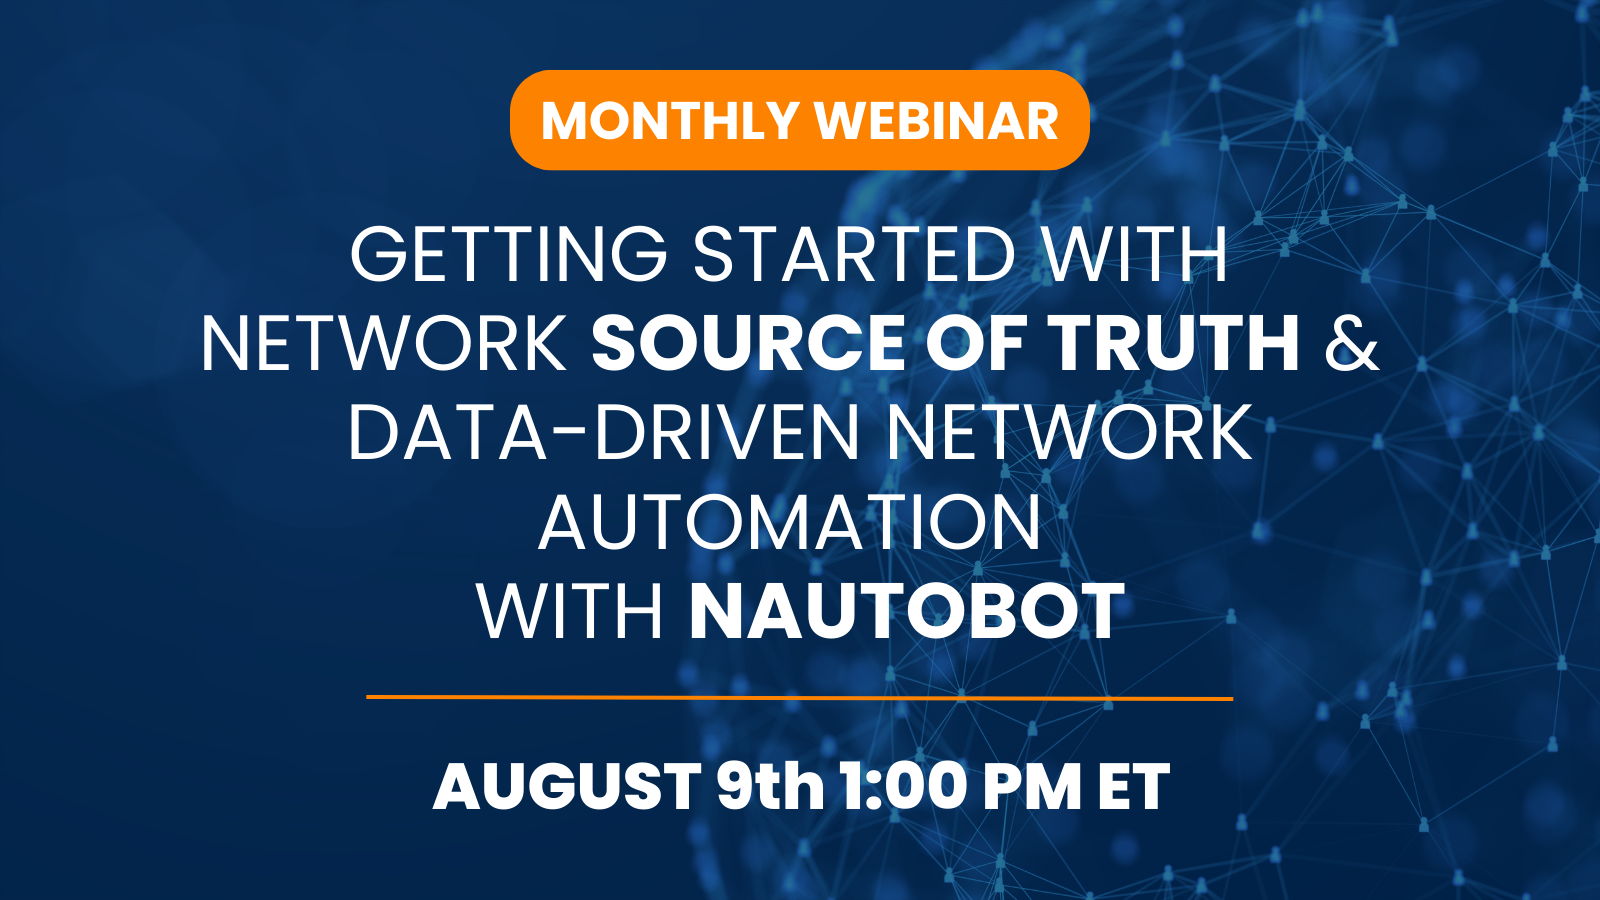 Getting Started with Network Source of Truth & Data-Driven Network Automation with Nautobot